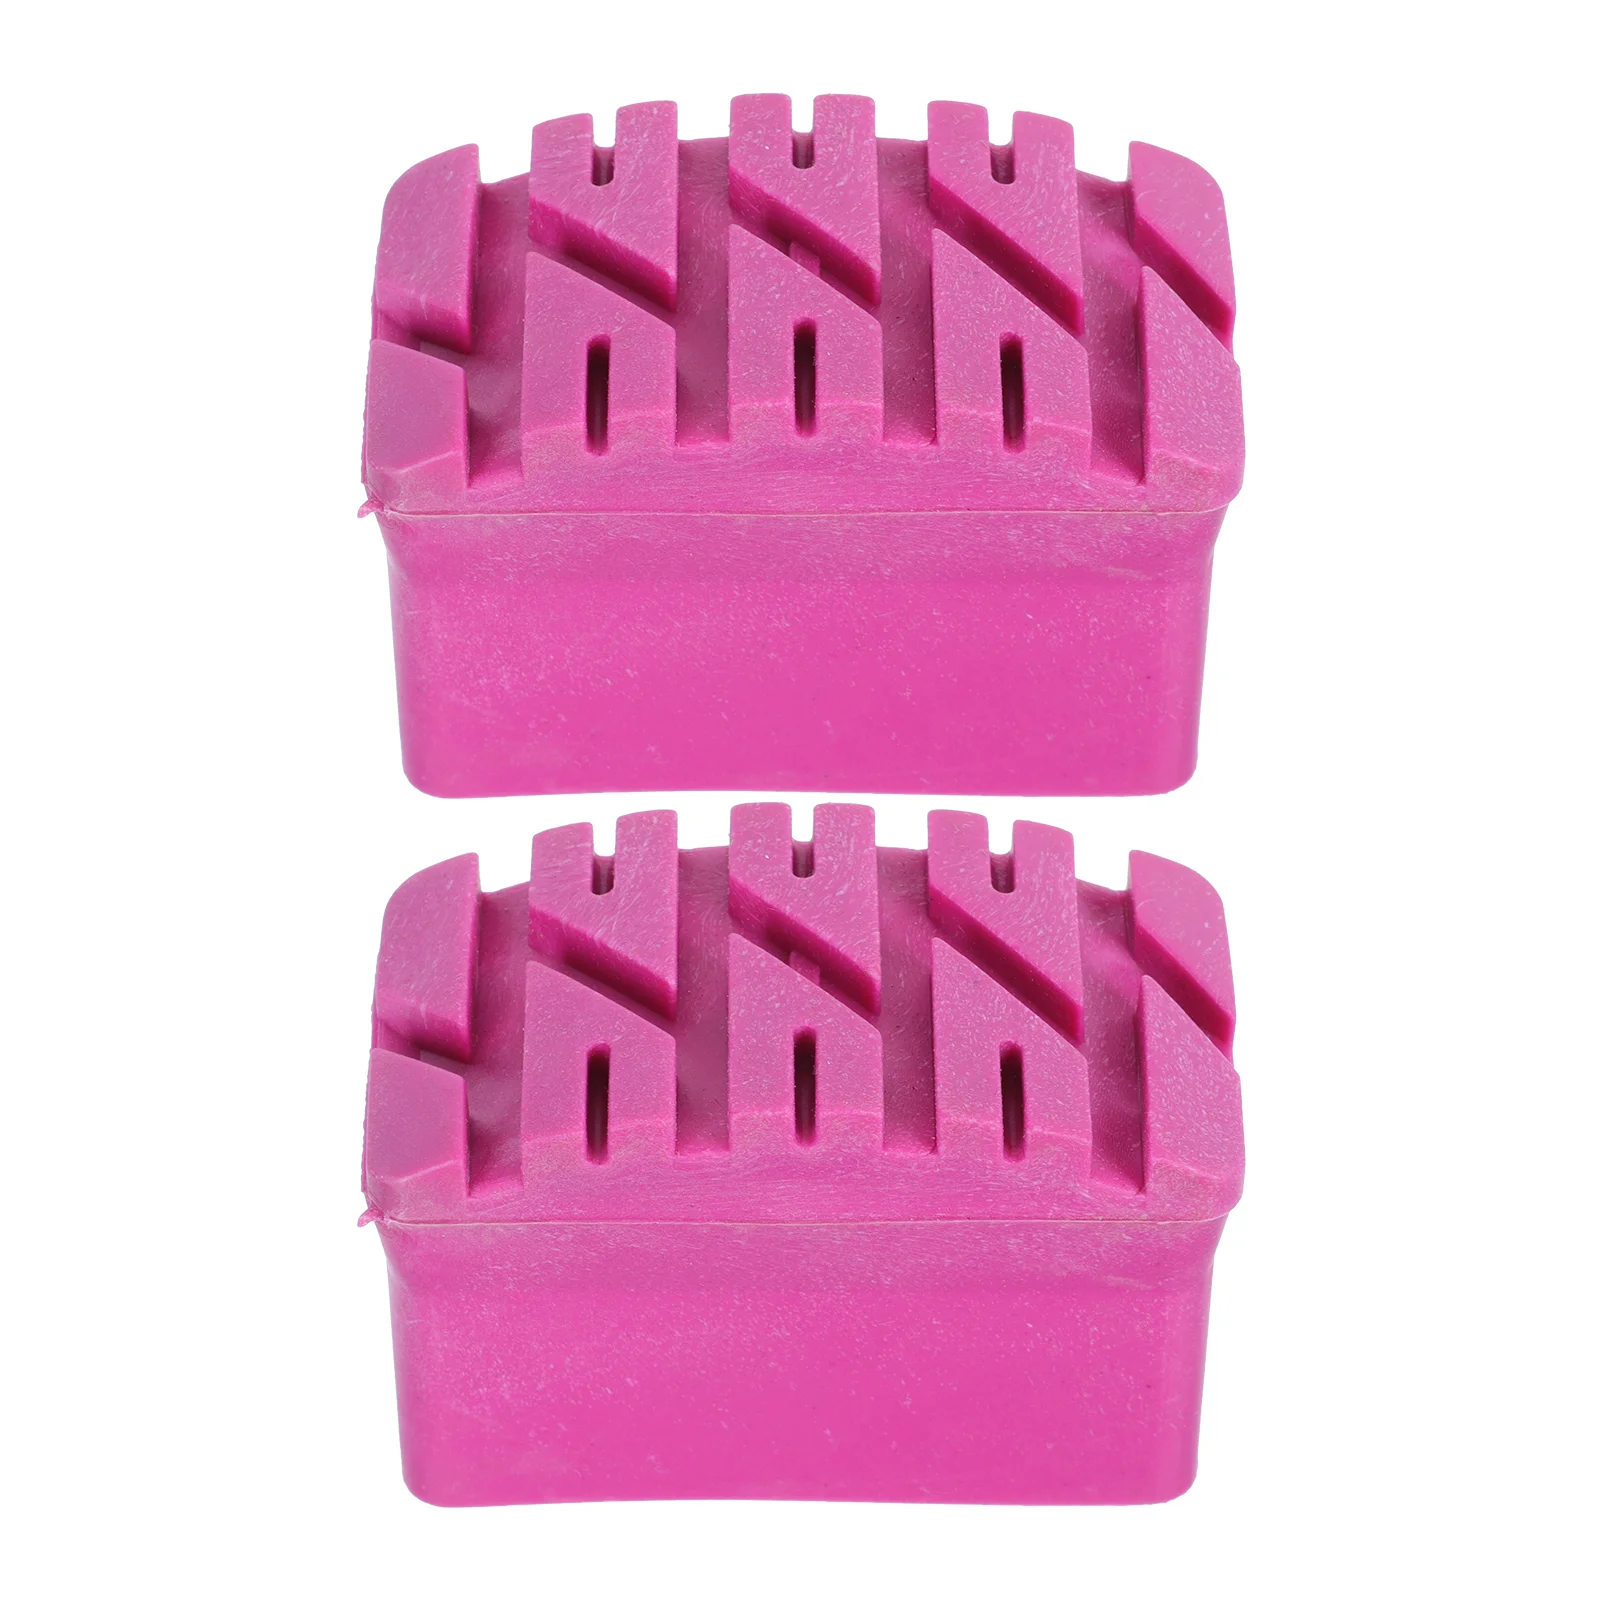 

2Pcs Step Ladder Feet Covers Ladder Leg Covers Non-skid Ladder Pads (Rosy)